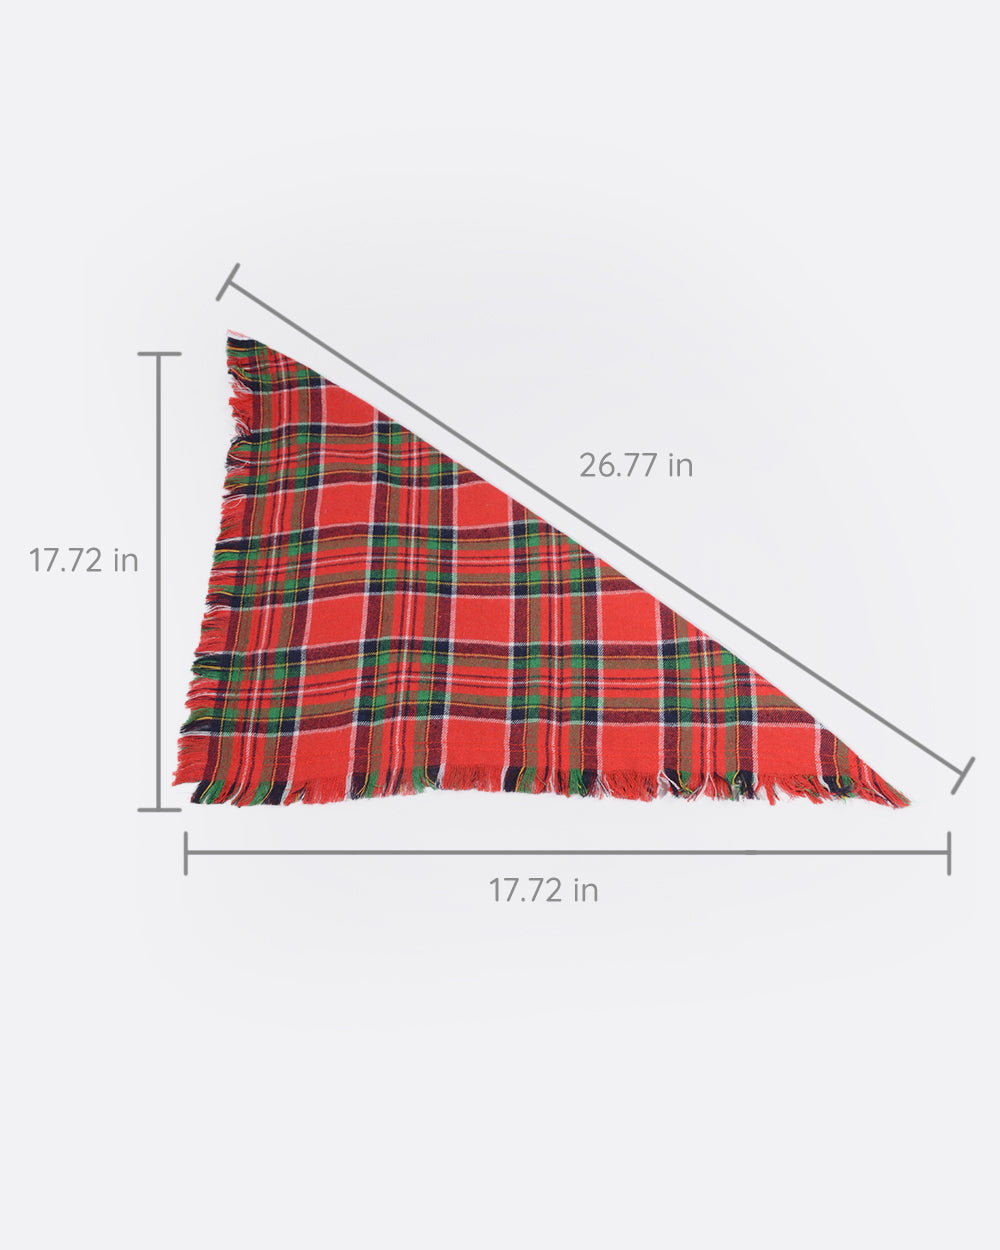 The size of this flannel dog scarf is 17.72x17.72x26.77 Inches. A royal Stewart plaid pet triangle kerchief will be the perfect accessory to dress up any pup in cool autumn and winter. The tartan pattern features red, green, yellow, and white. Looks stylish and festive when used in some festivals and holidays.